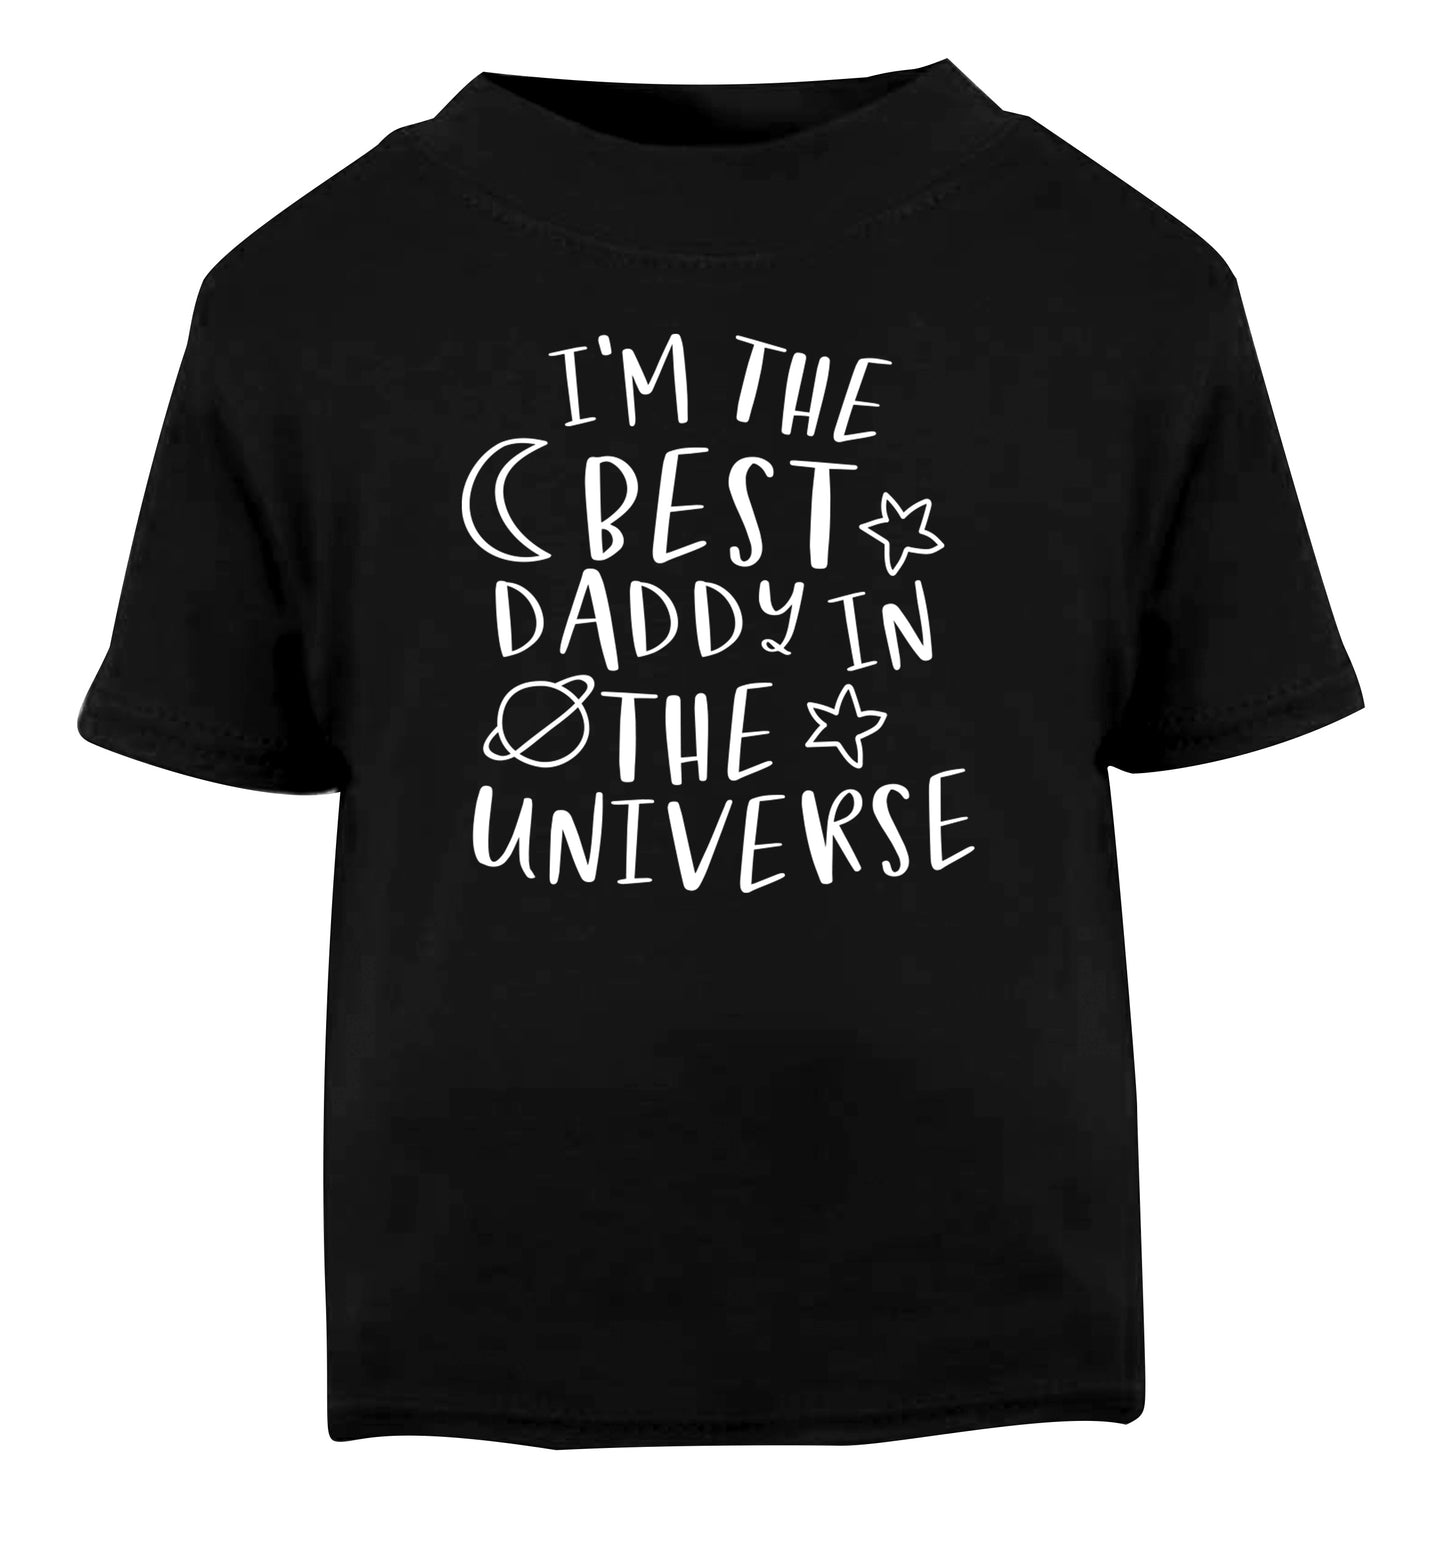 I'm the best daddy in the universe Black Baby Toddler Tshirt 2 years